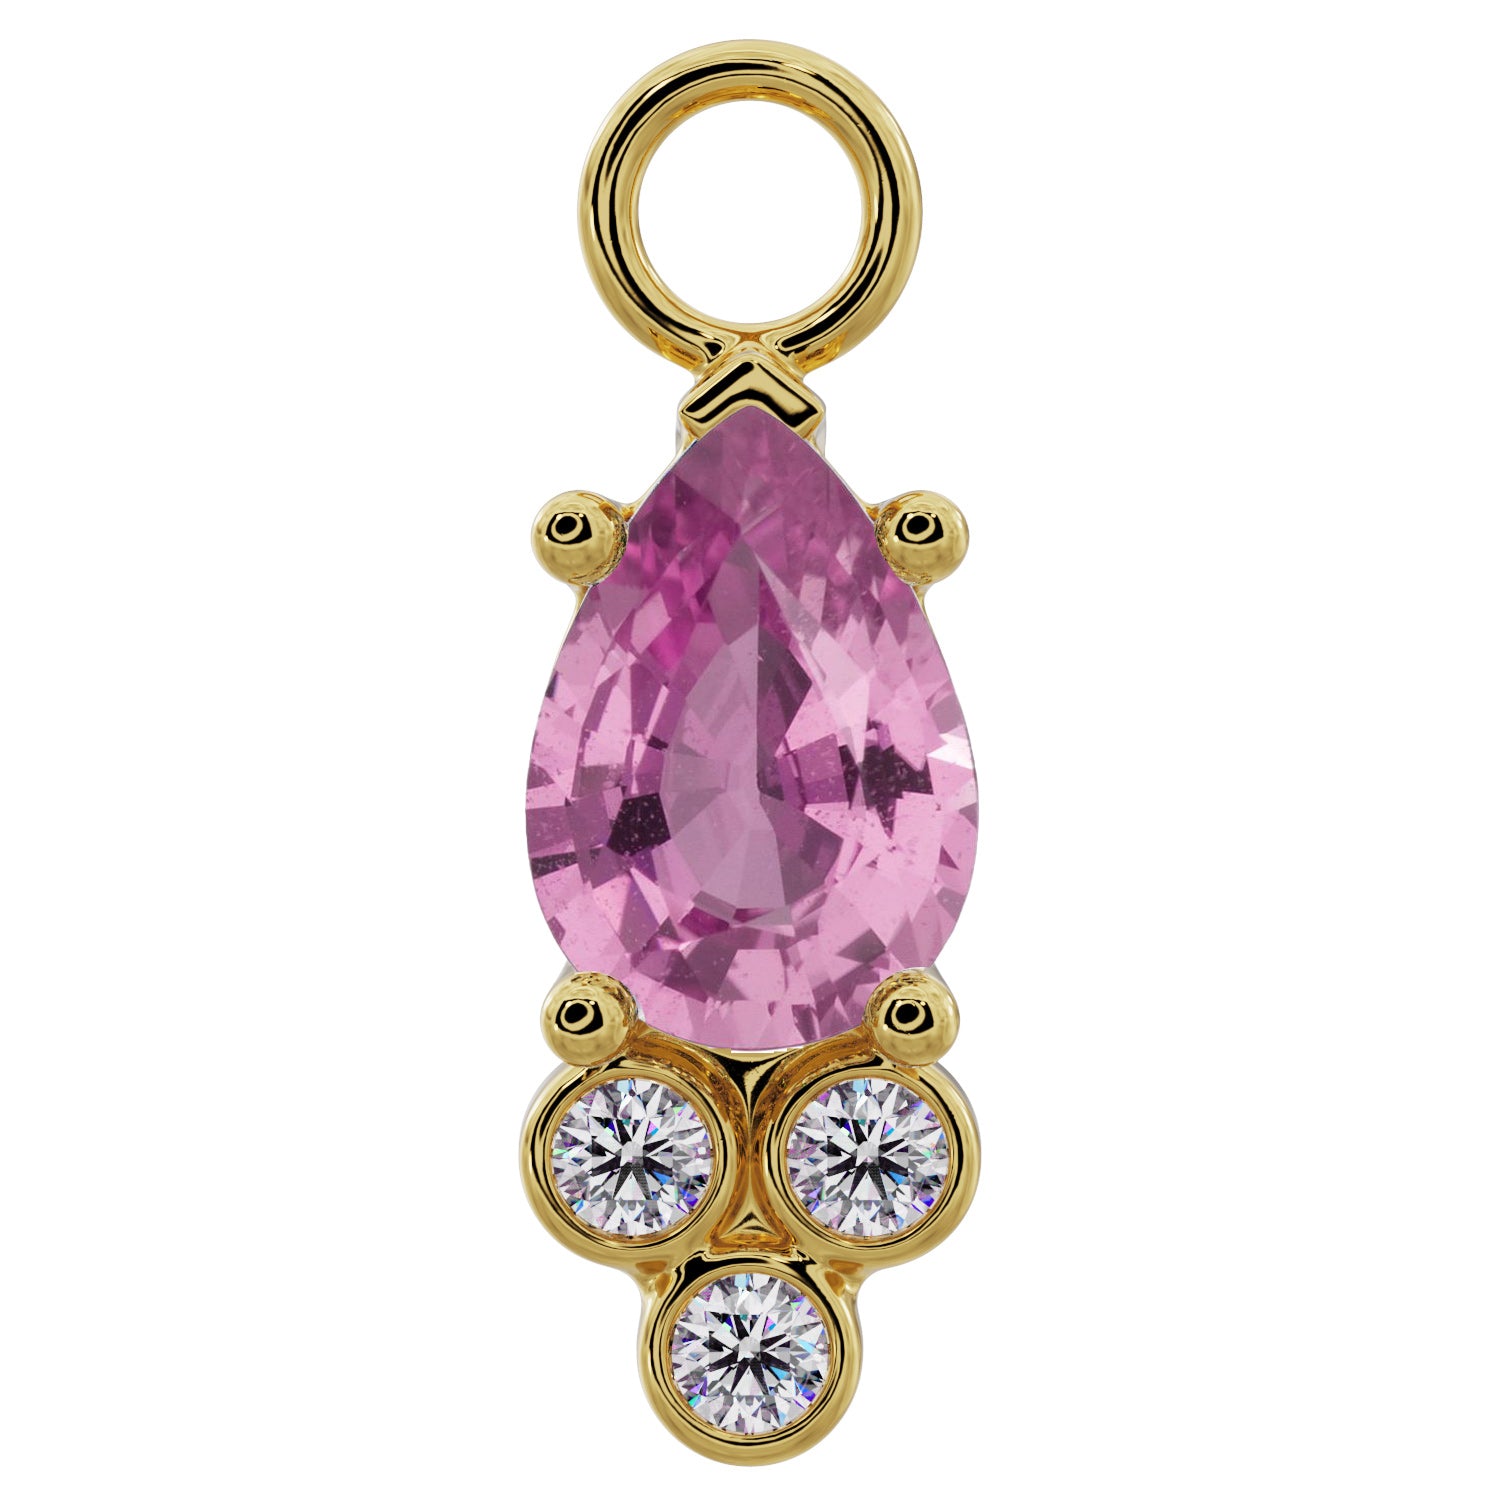 Pear with Tiny Diamonds Charm Accessory for Piercing Jewelry-Pink Sapphire   14K Yellow Gold